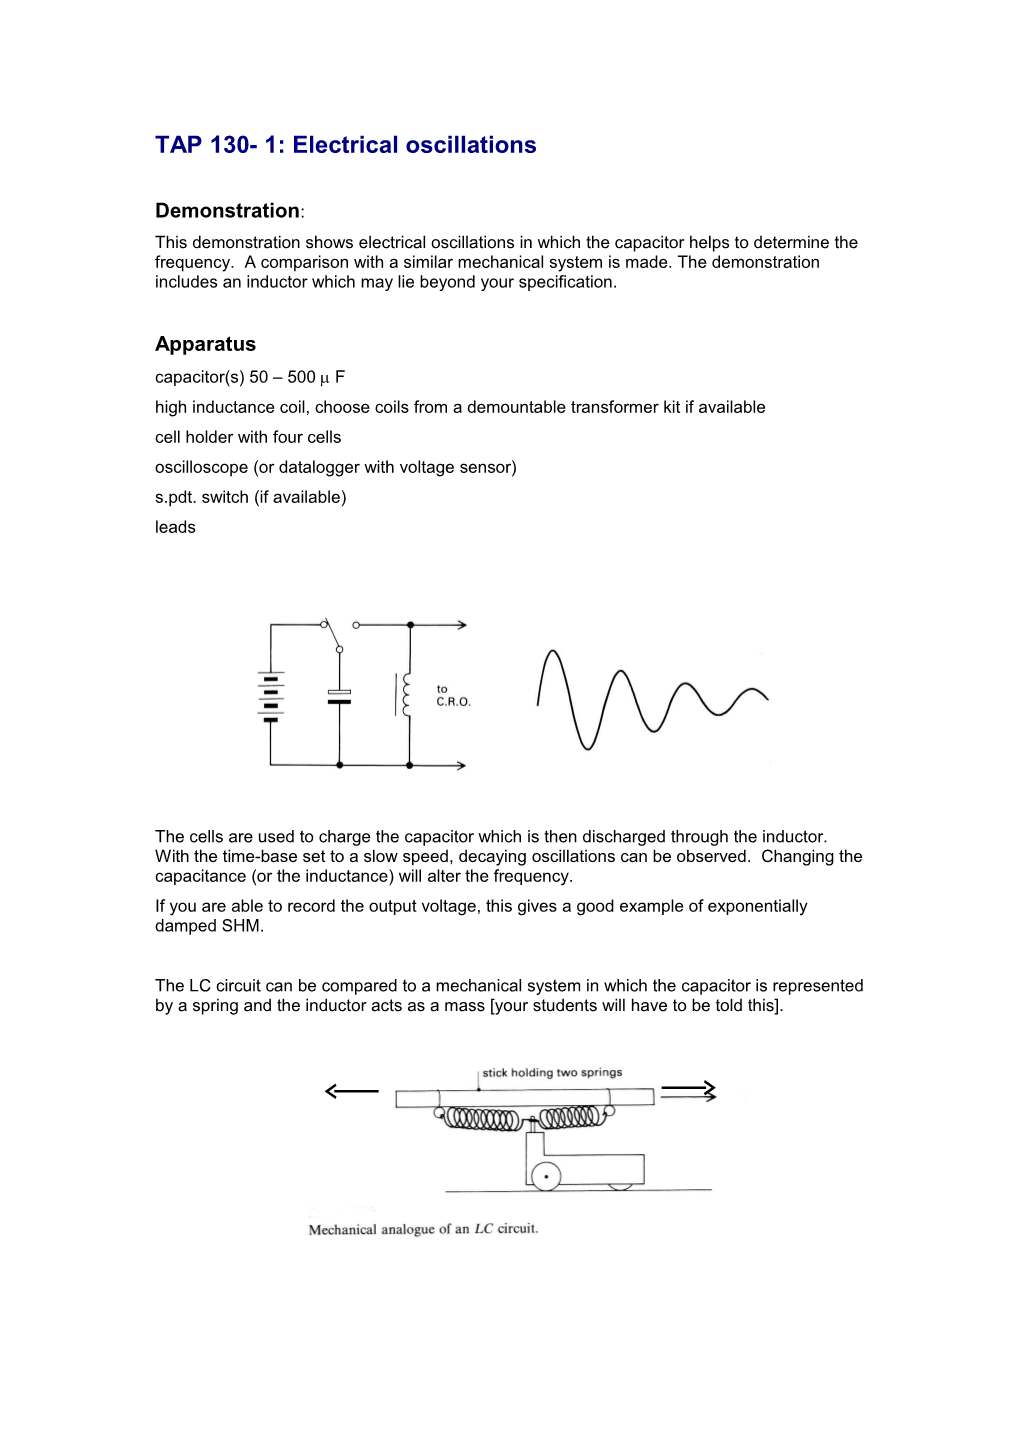 TAP 130- 1: Electrical Oscillations